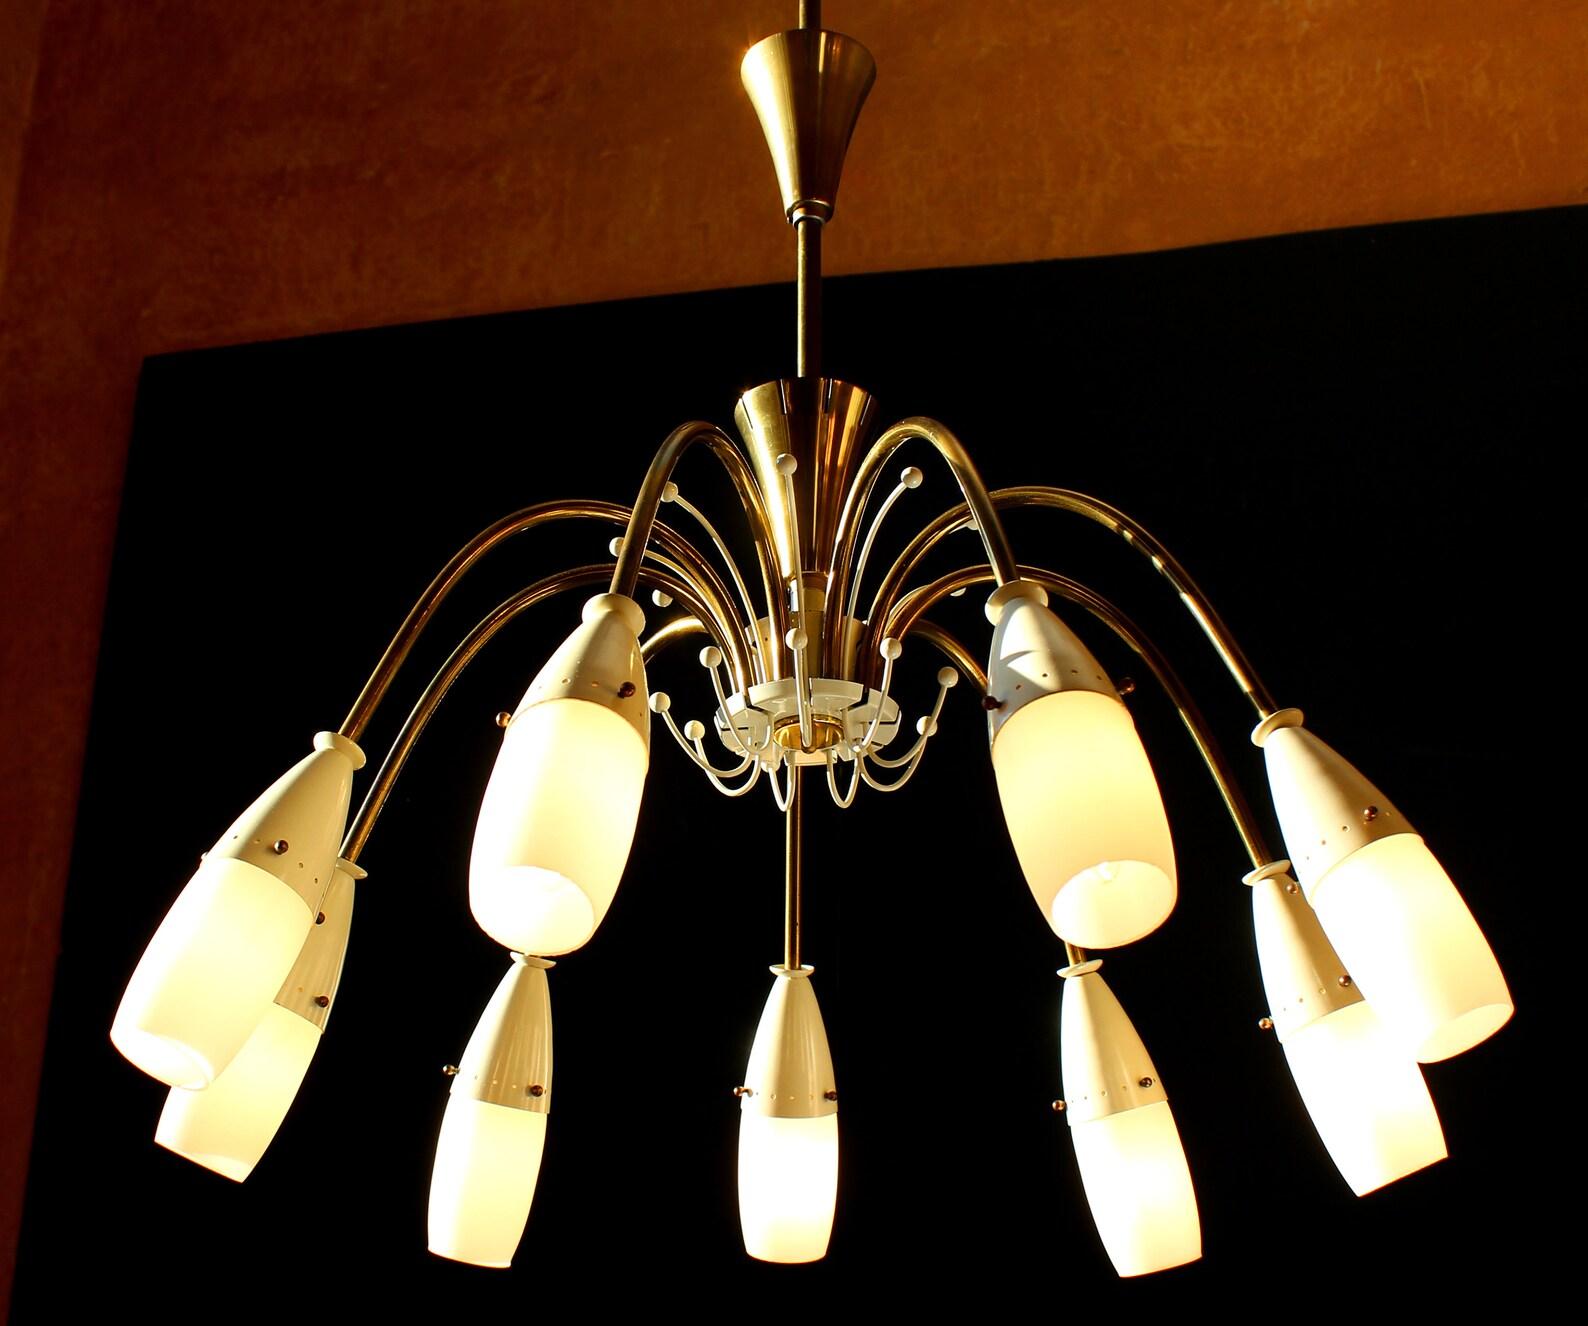 WHITE SPIDER SPUTNIK CHANDELIER 9 LIGHTS E14 WITH OPAL GLASS TULIPS
LBL GERMANY LEIPZIG 1959. REWIRED

DIAMETER 23 INCHES, ORIGINAL HEIGHT 32 INCHES

German design from the 50s to 70s is leaving the world some valuable modern classics. This